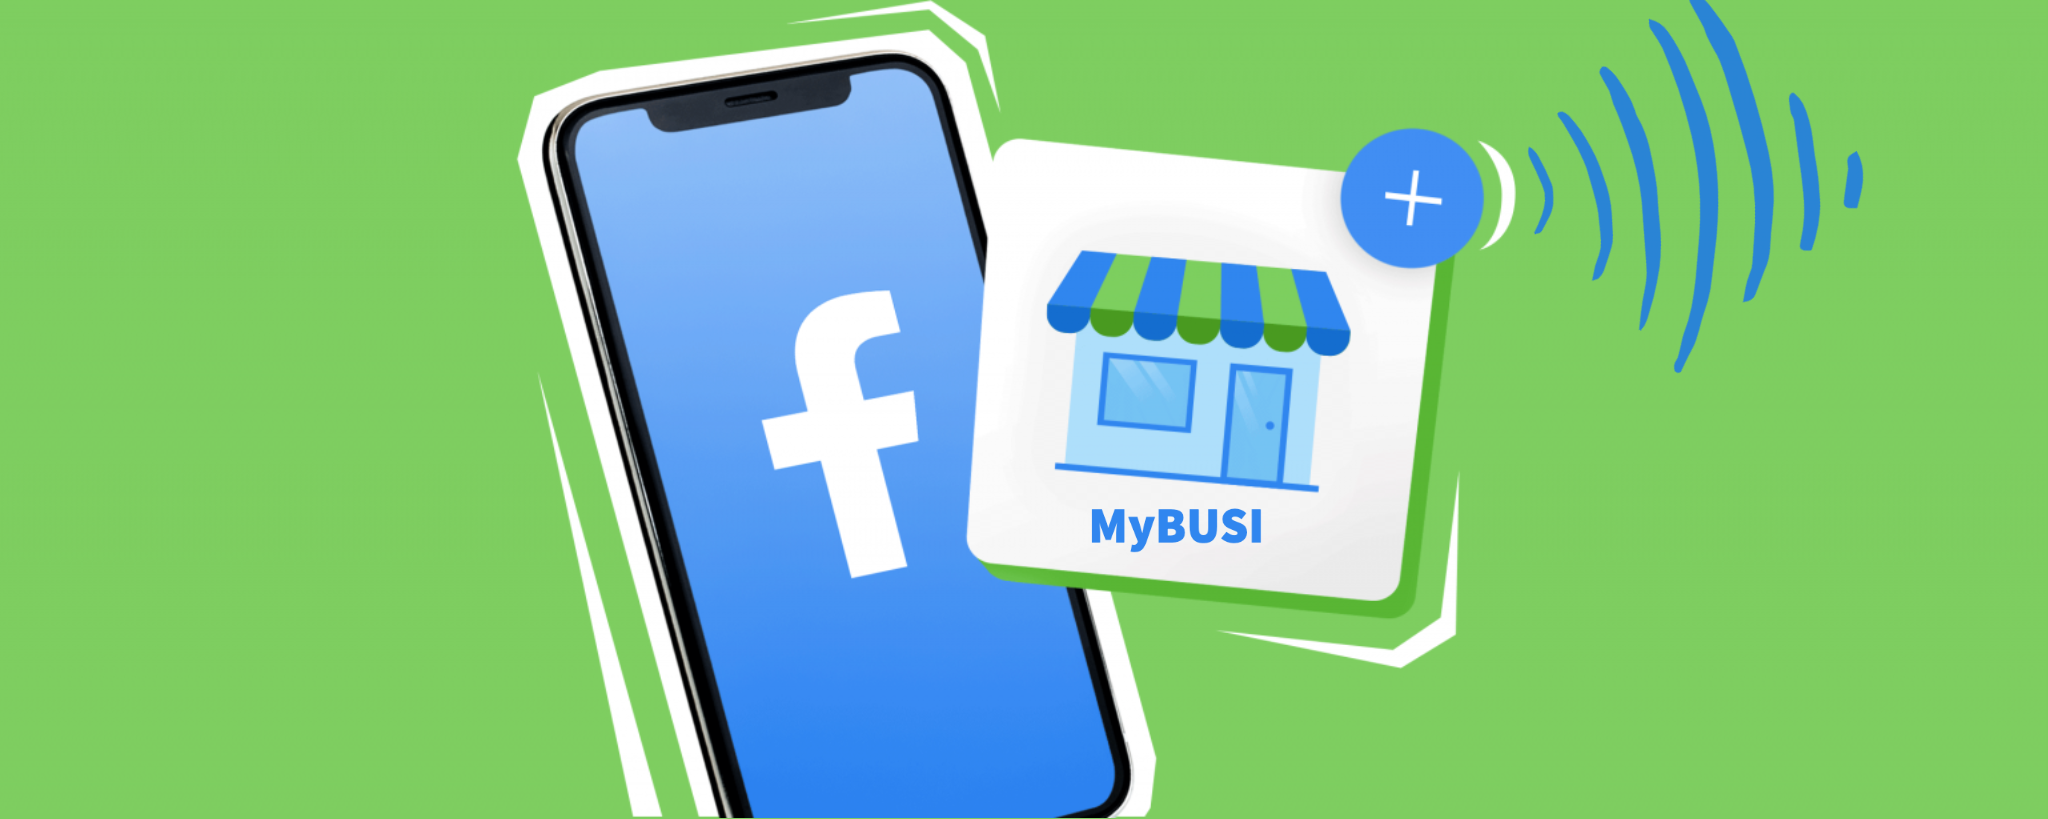 Comment connecter MyBUSI avec sa page Facebook